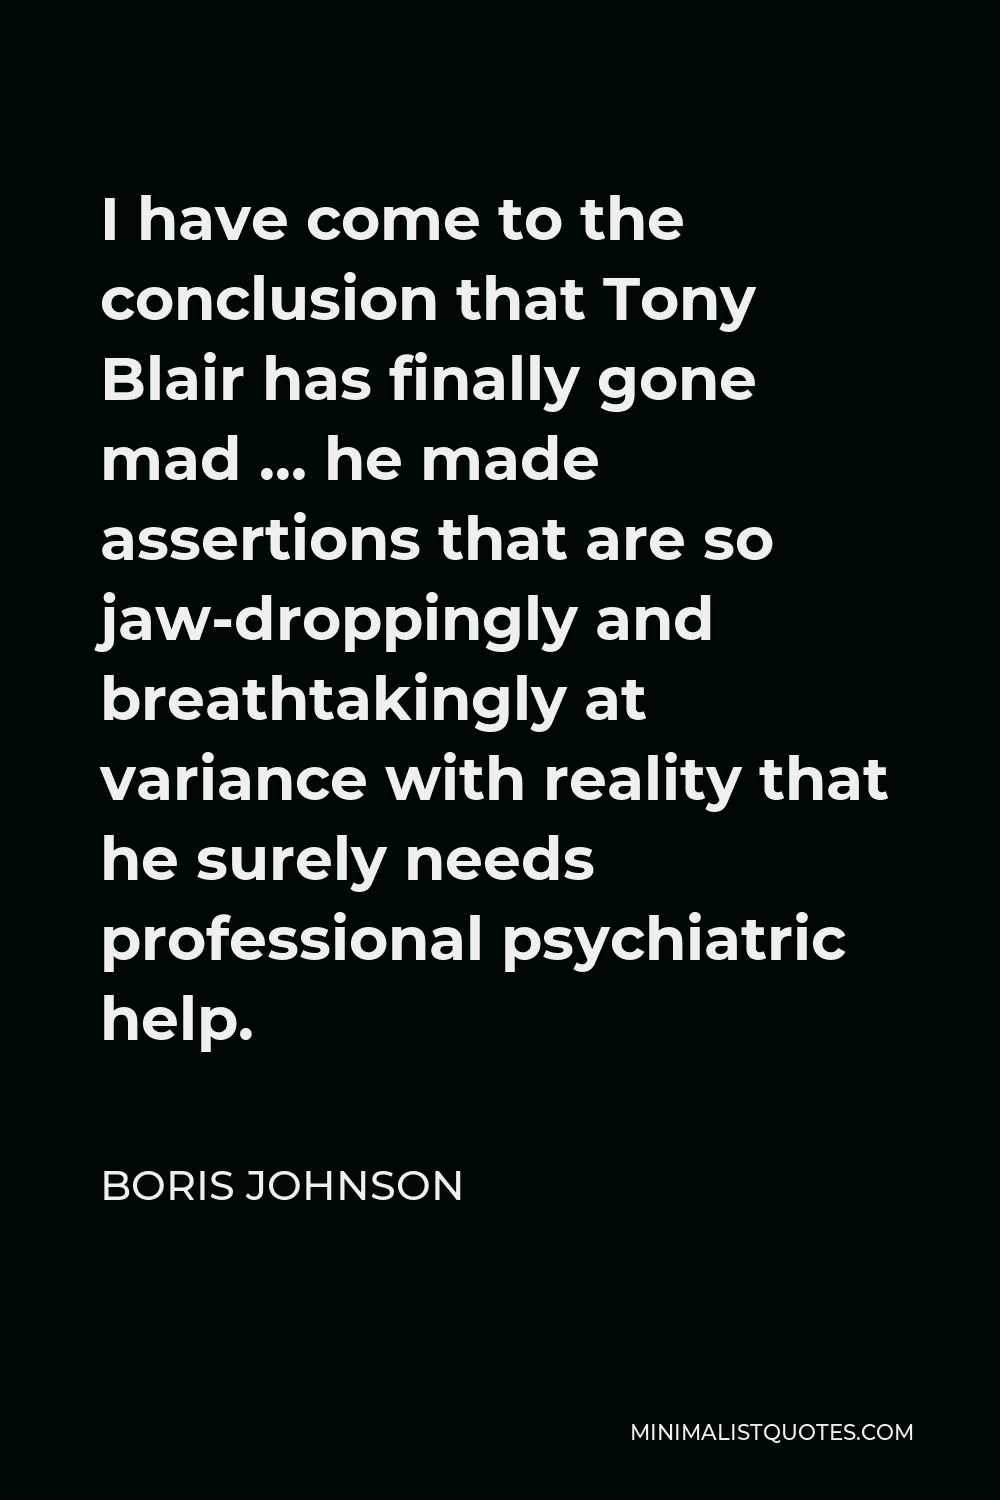 Boris Johnson Quote - I have come to the conclusion that Tony Blair has finally gone mad … he made assertions that are so jaw-droppingly and breathtakingly at variance with reality that he surely needs professional psychiatric help.